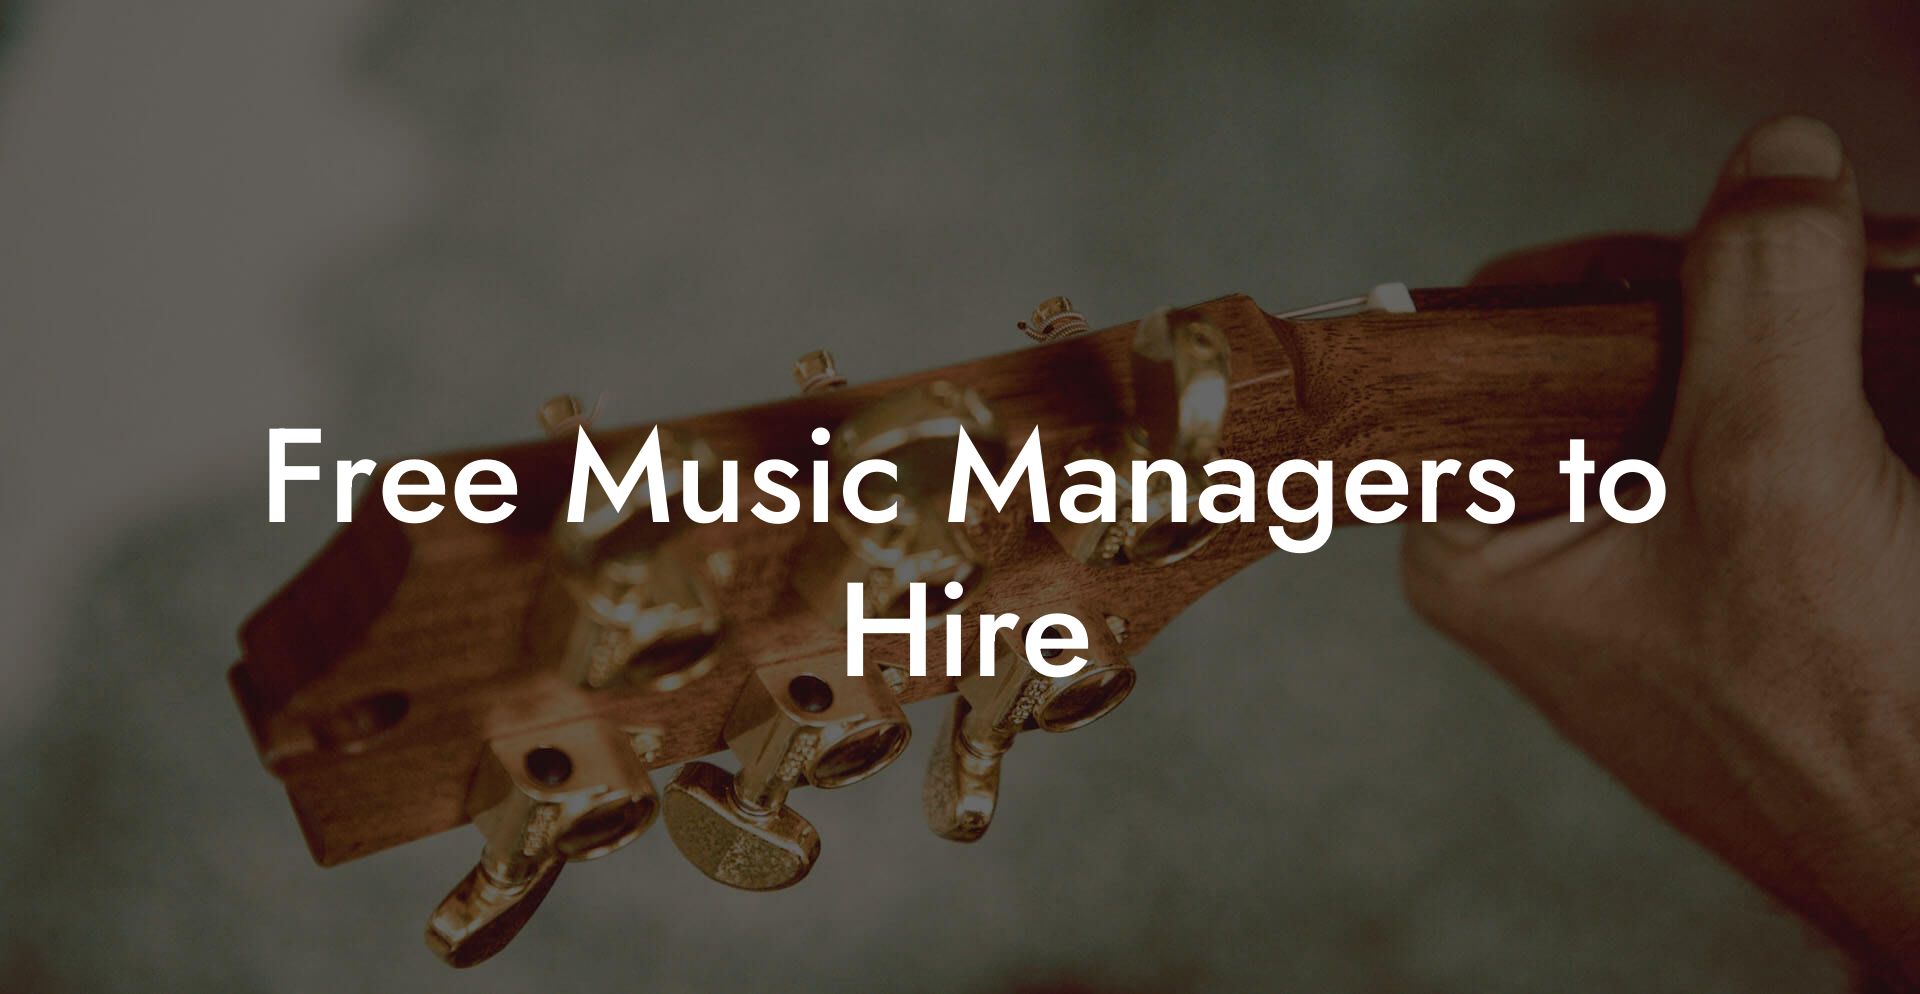 Free Music Managers to Hire